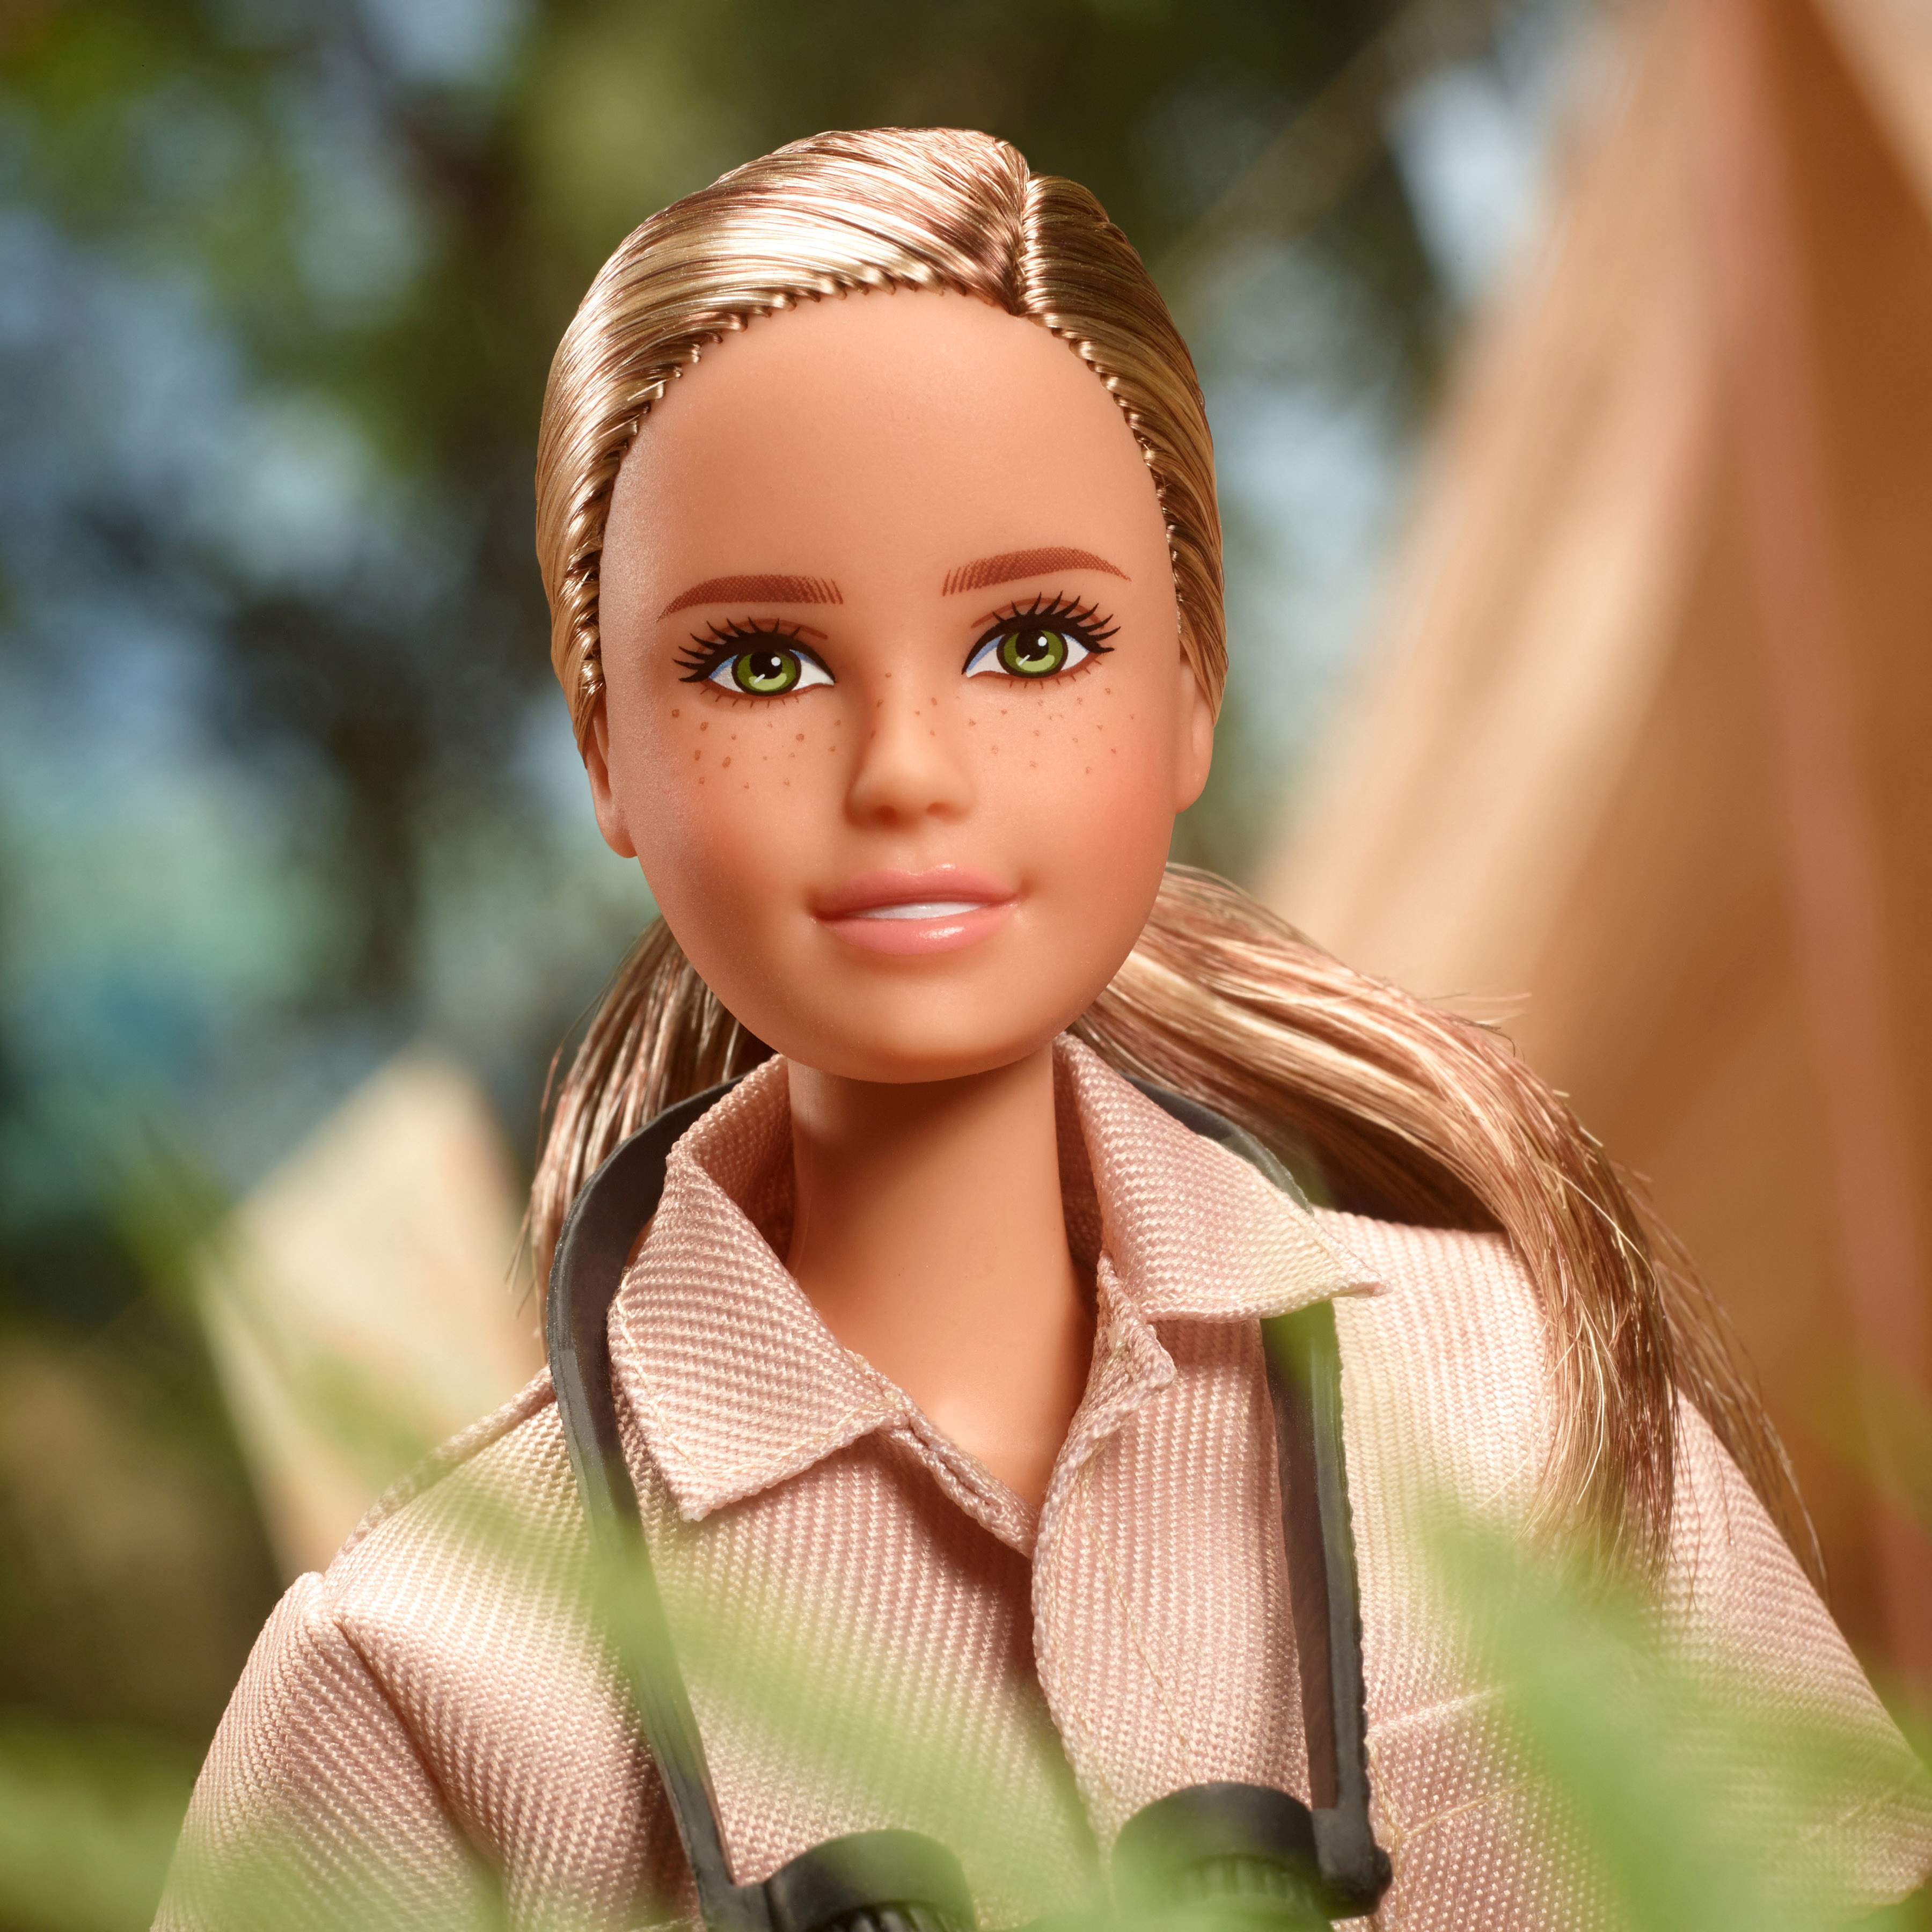 Primatologist Jane Goodall gets Barbie doll in her likeness